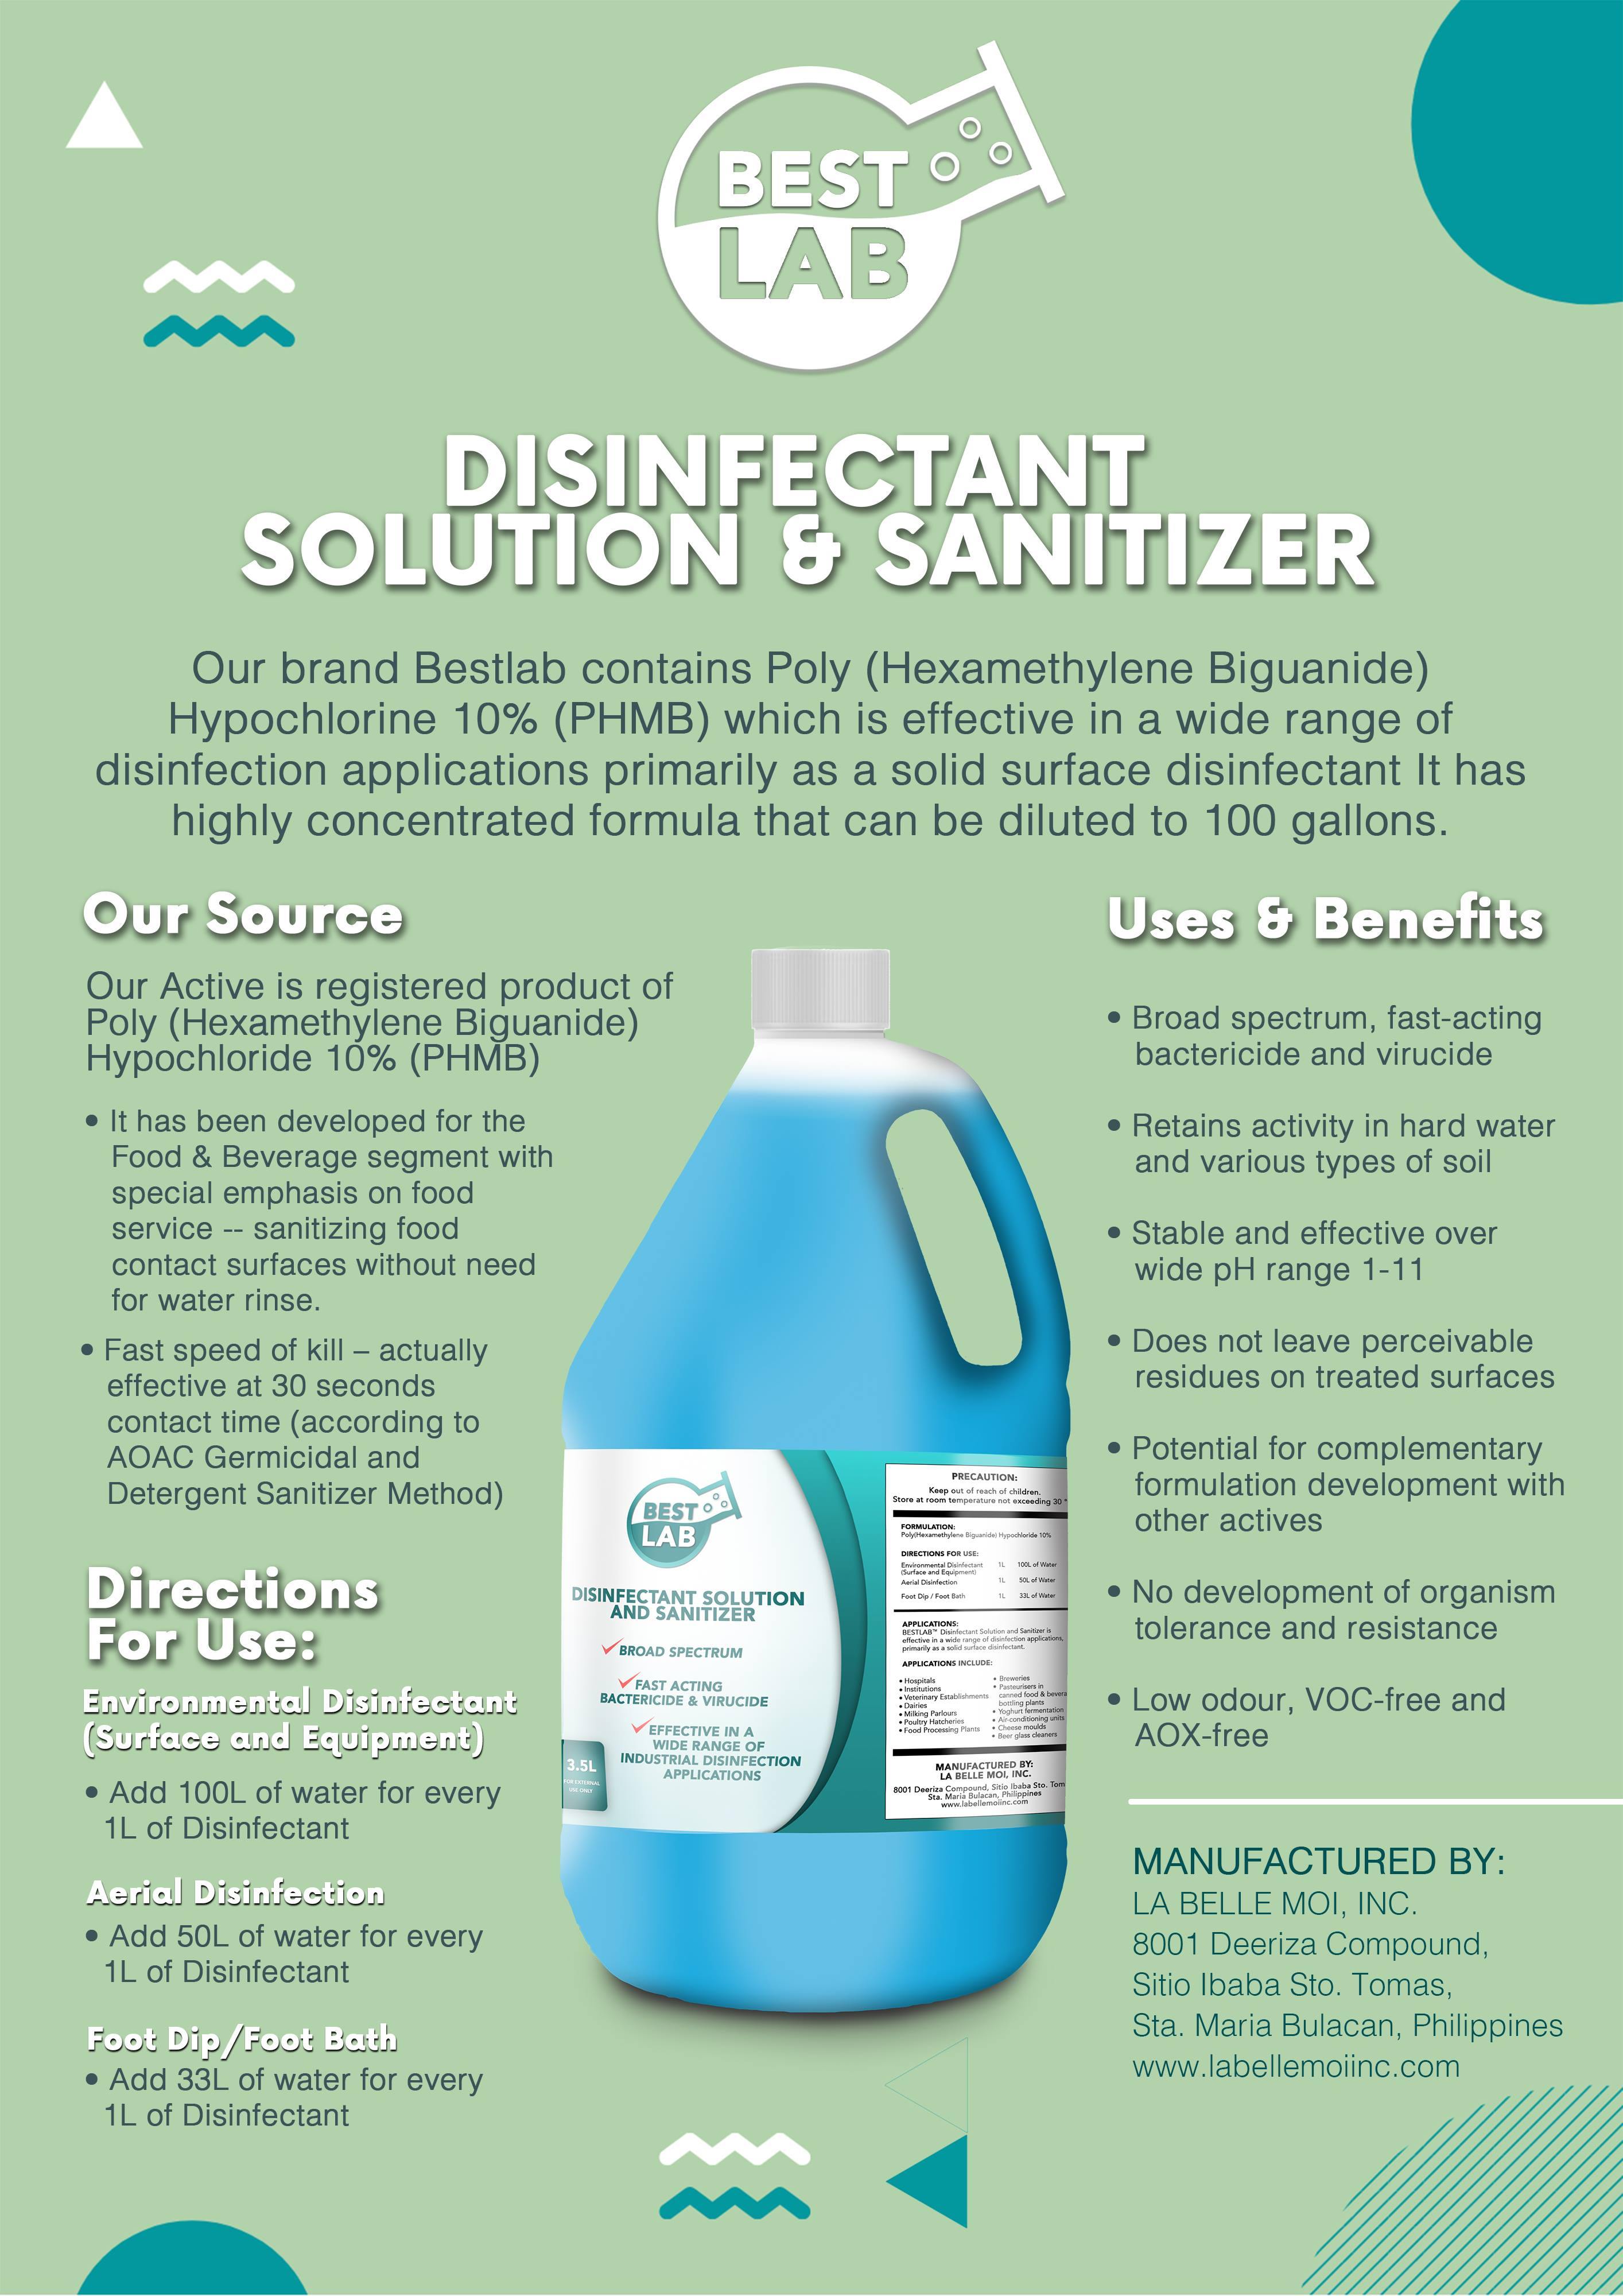 Bestlab Disinfectant Solution and Sanitizer for Home Cleaning